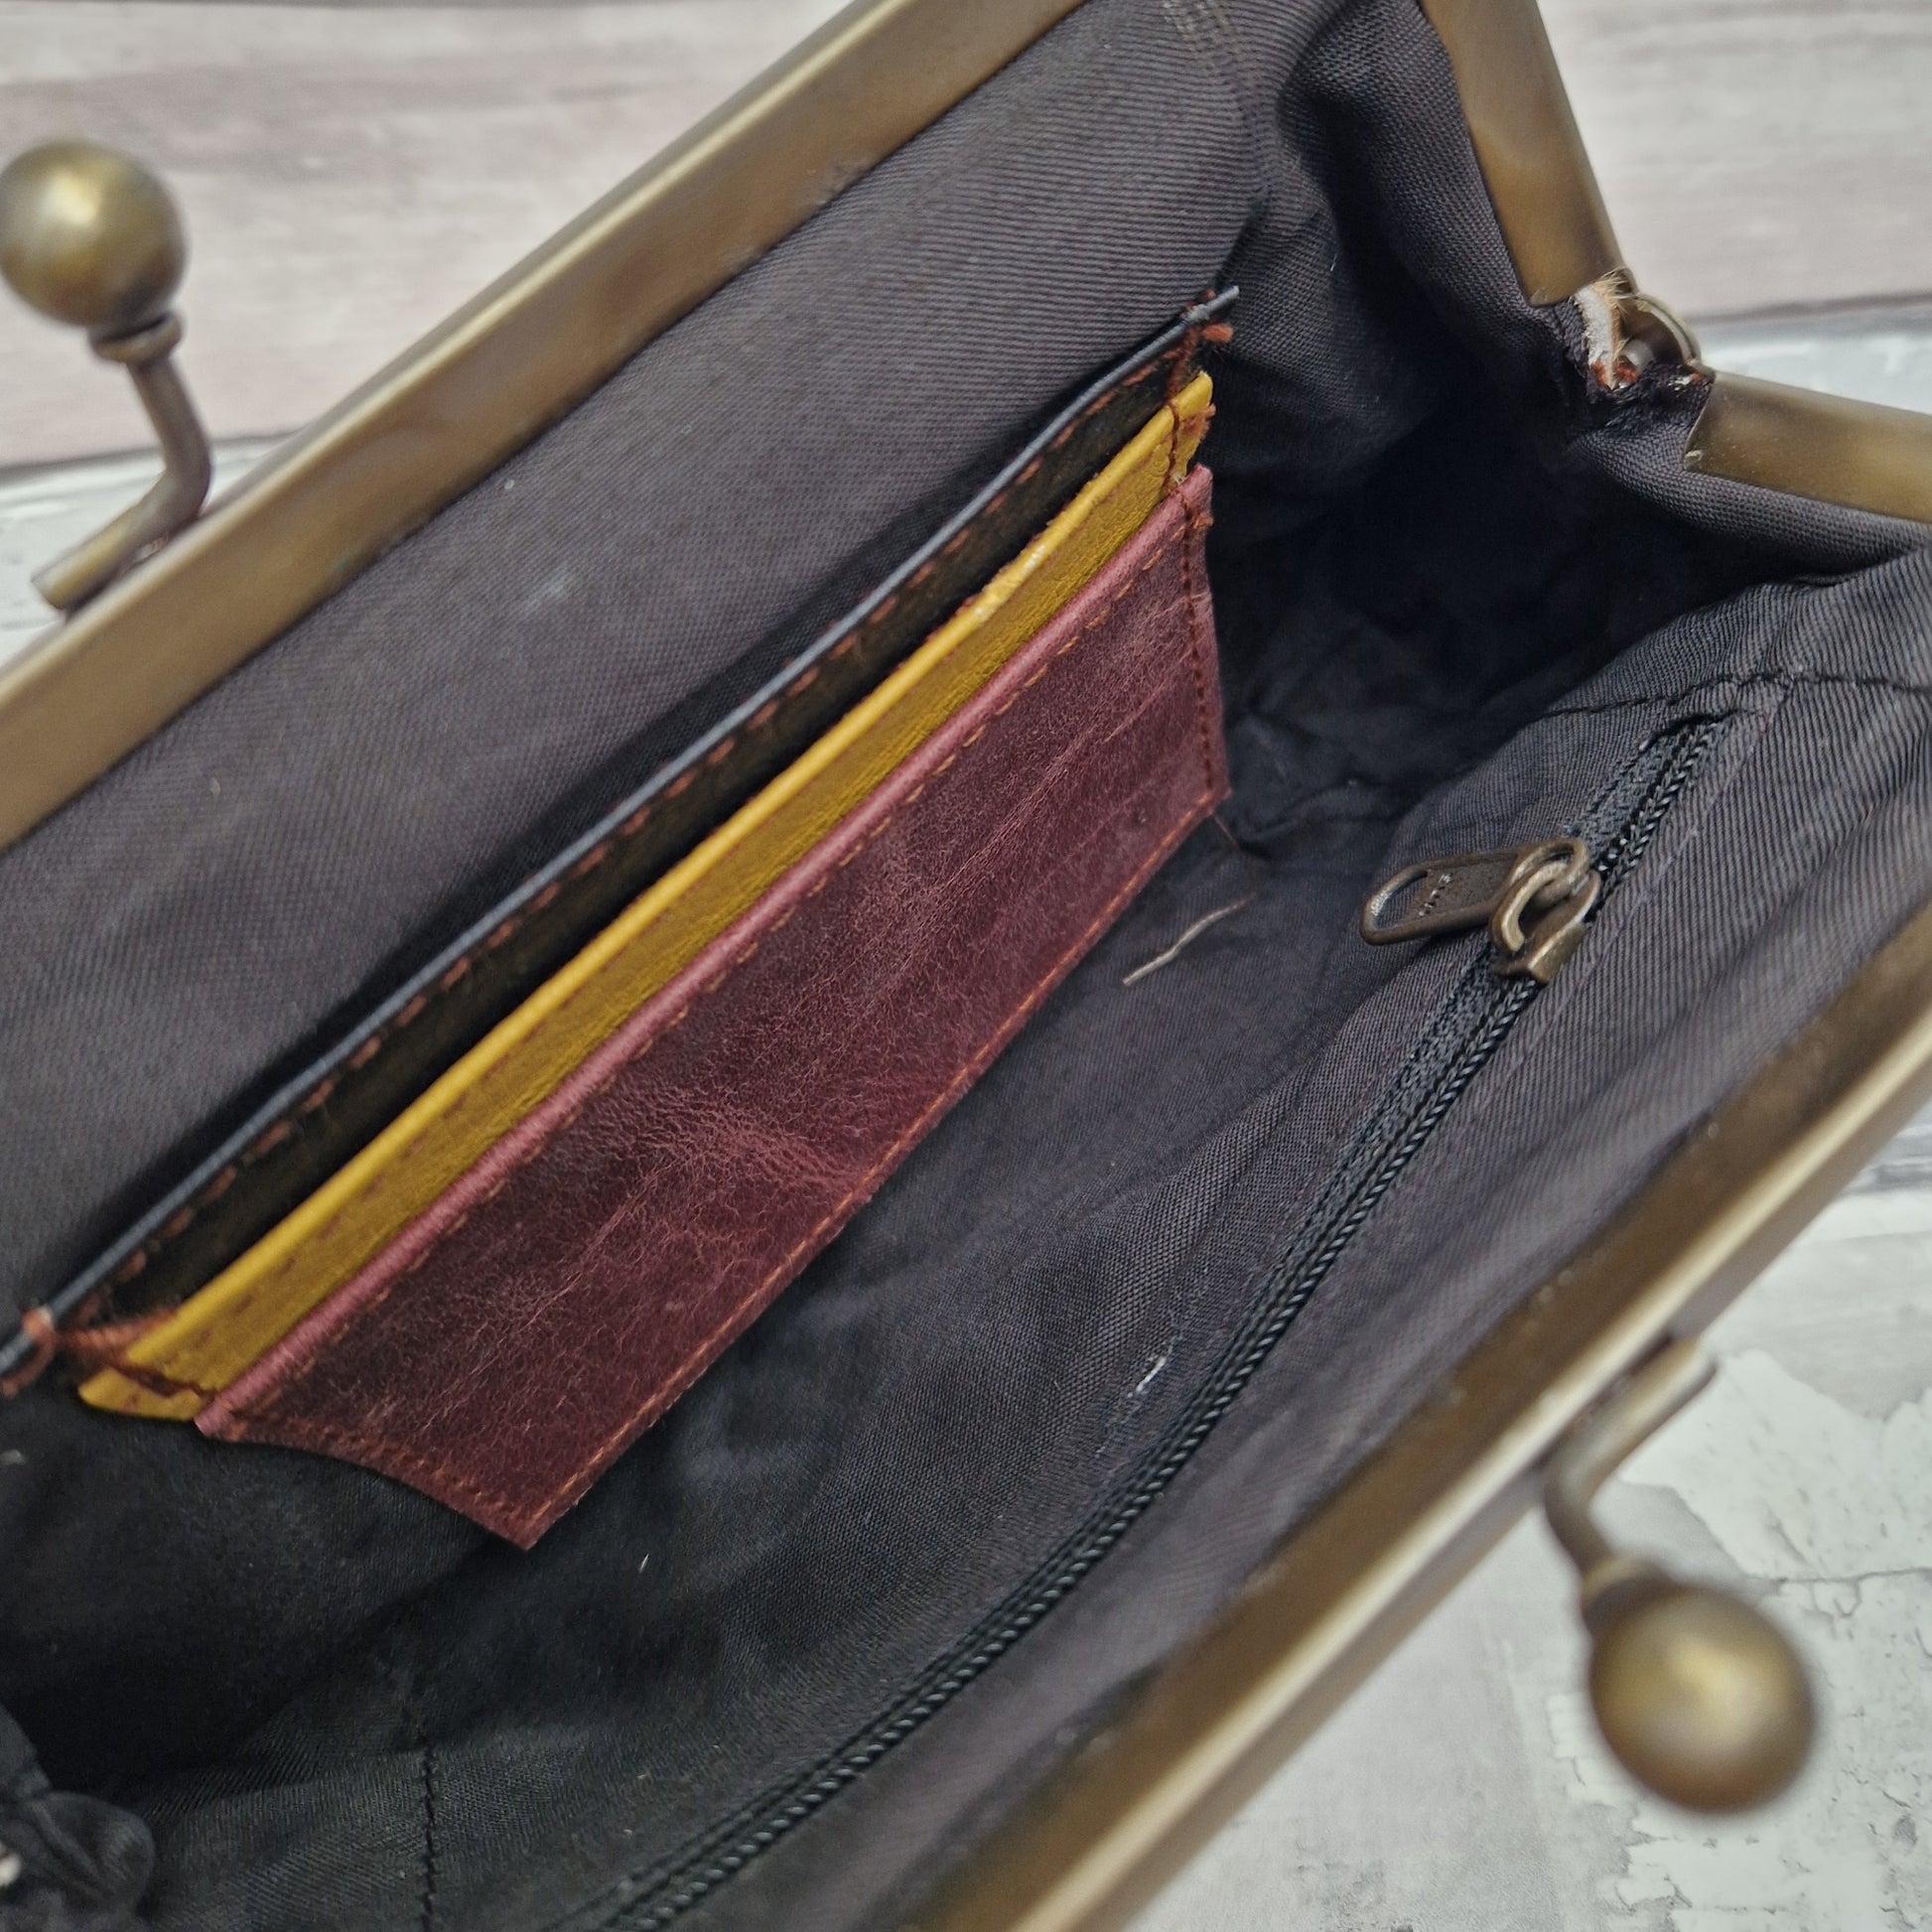 Inside of clutch bag showing zipped pocket and card slots.